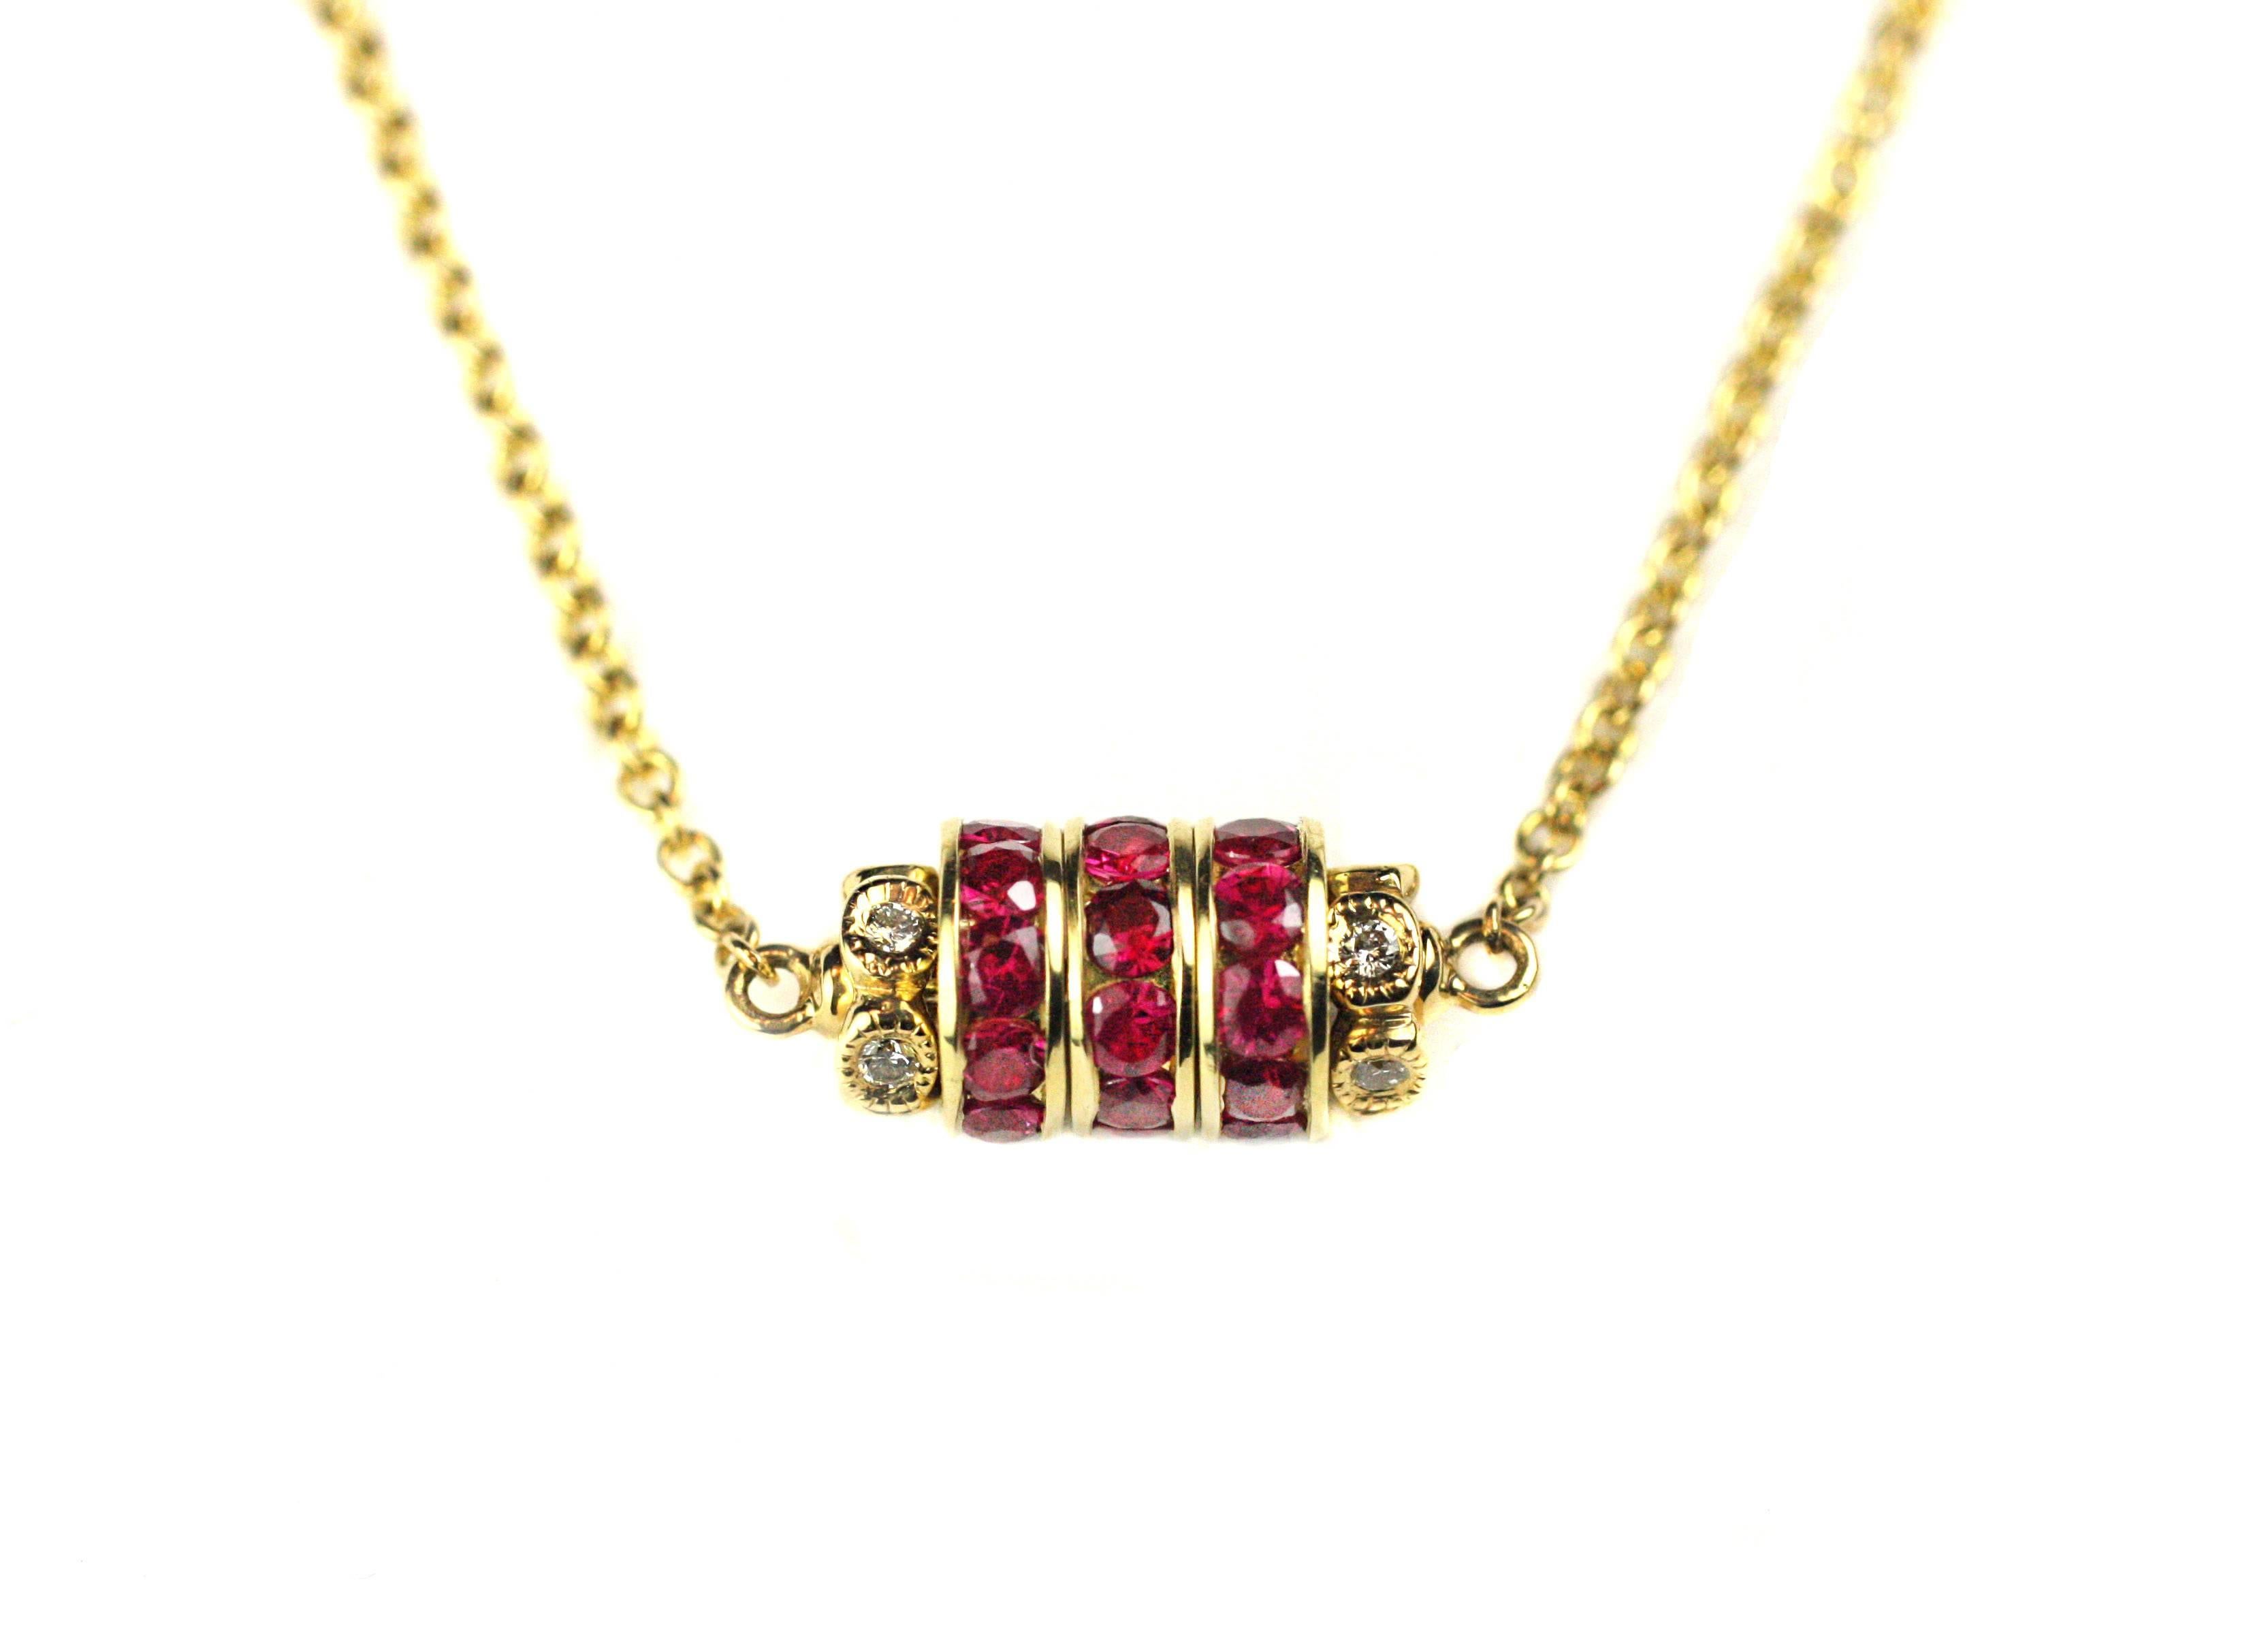 This beautiful necklace is made with 18kt yellow gold ruby and diamond rondelles. The ruby rondelles contain 27 rubies equalling 1.20 carats and the diamond rondelles contain 10 brilliant diamonds equalling .10 carats. Necklace measures 16